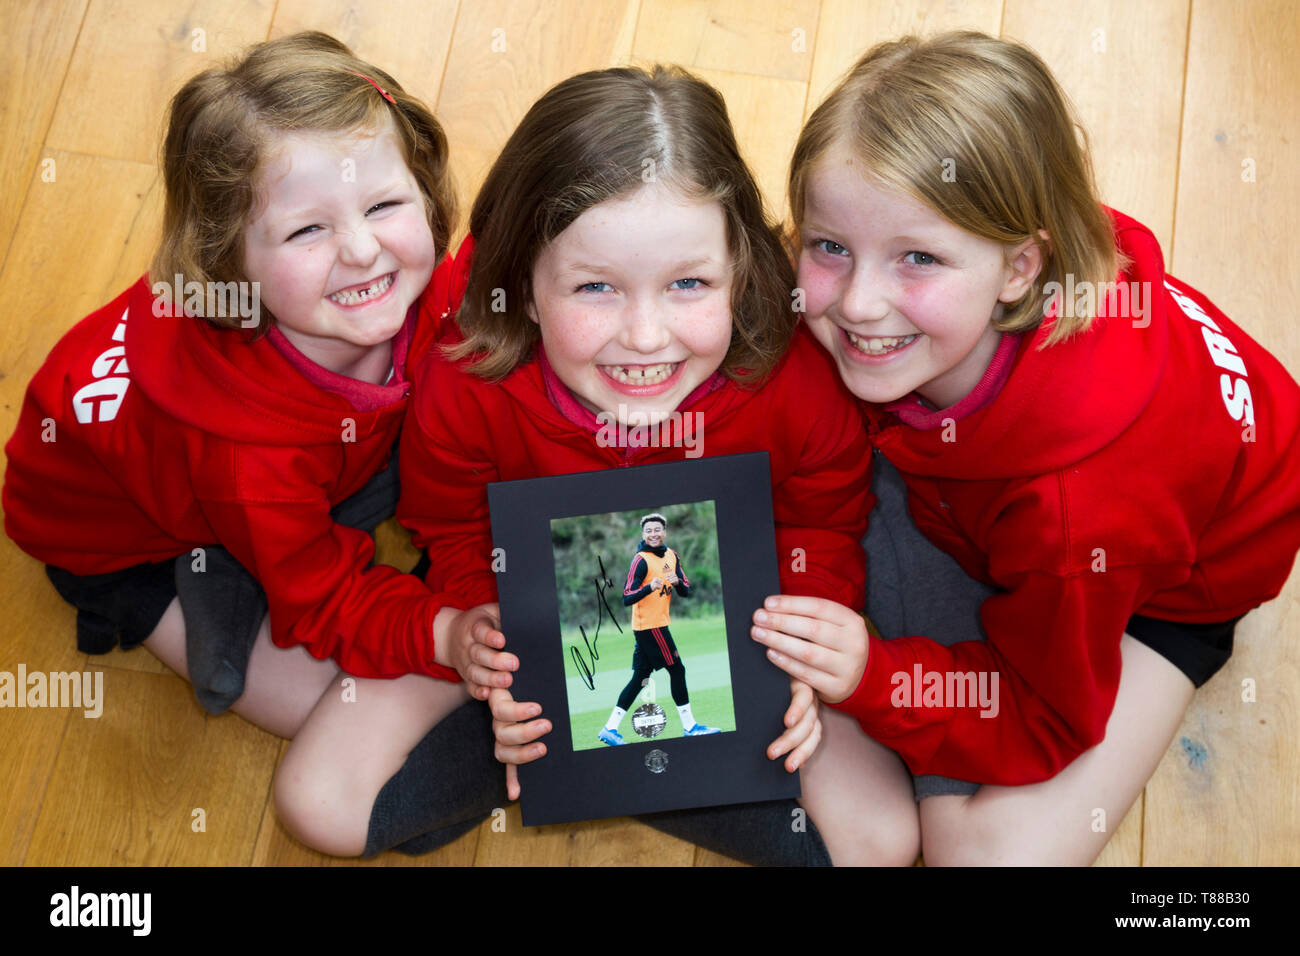 Three football fan / fans / primary school girls / children / kids with a signed autograph photograph of Manchester United & England soccer player Jesse Lingard. Stock Photo